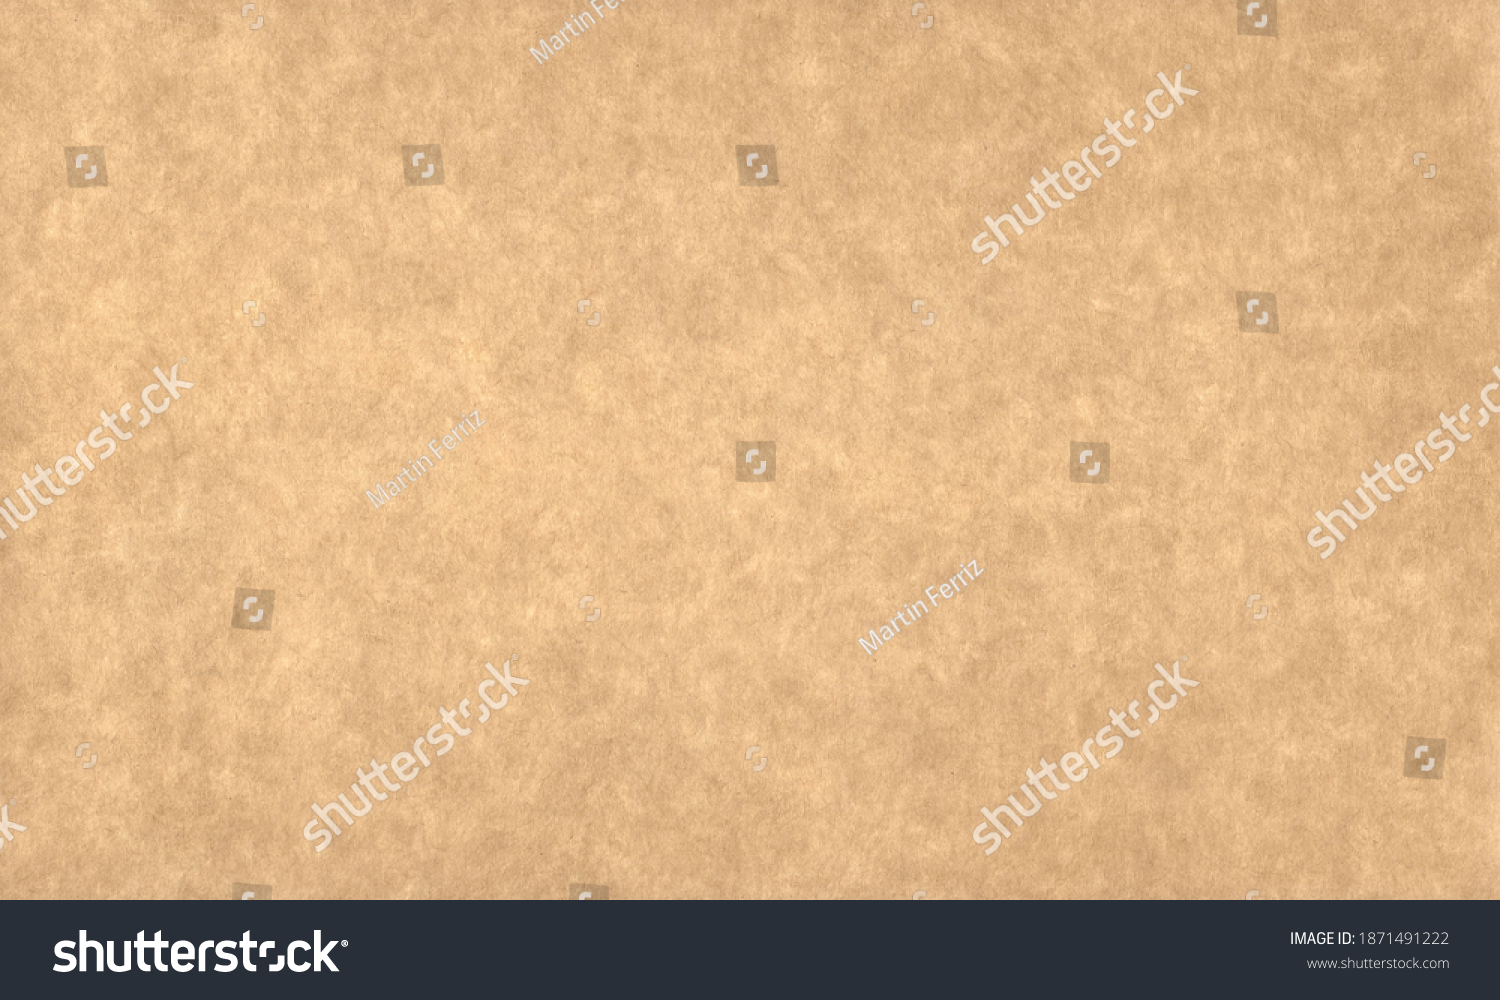 Cardboard or recycled paper texture to use as background in design, art and illustration works #1871491222